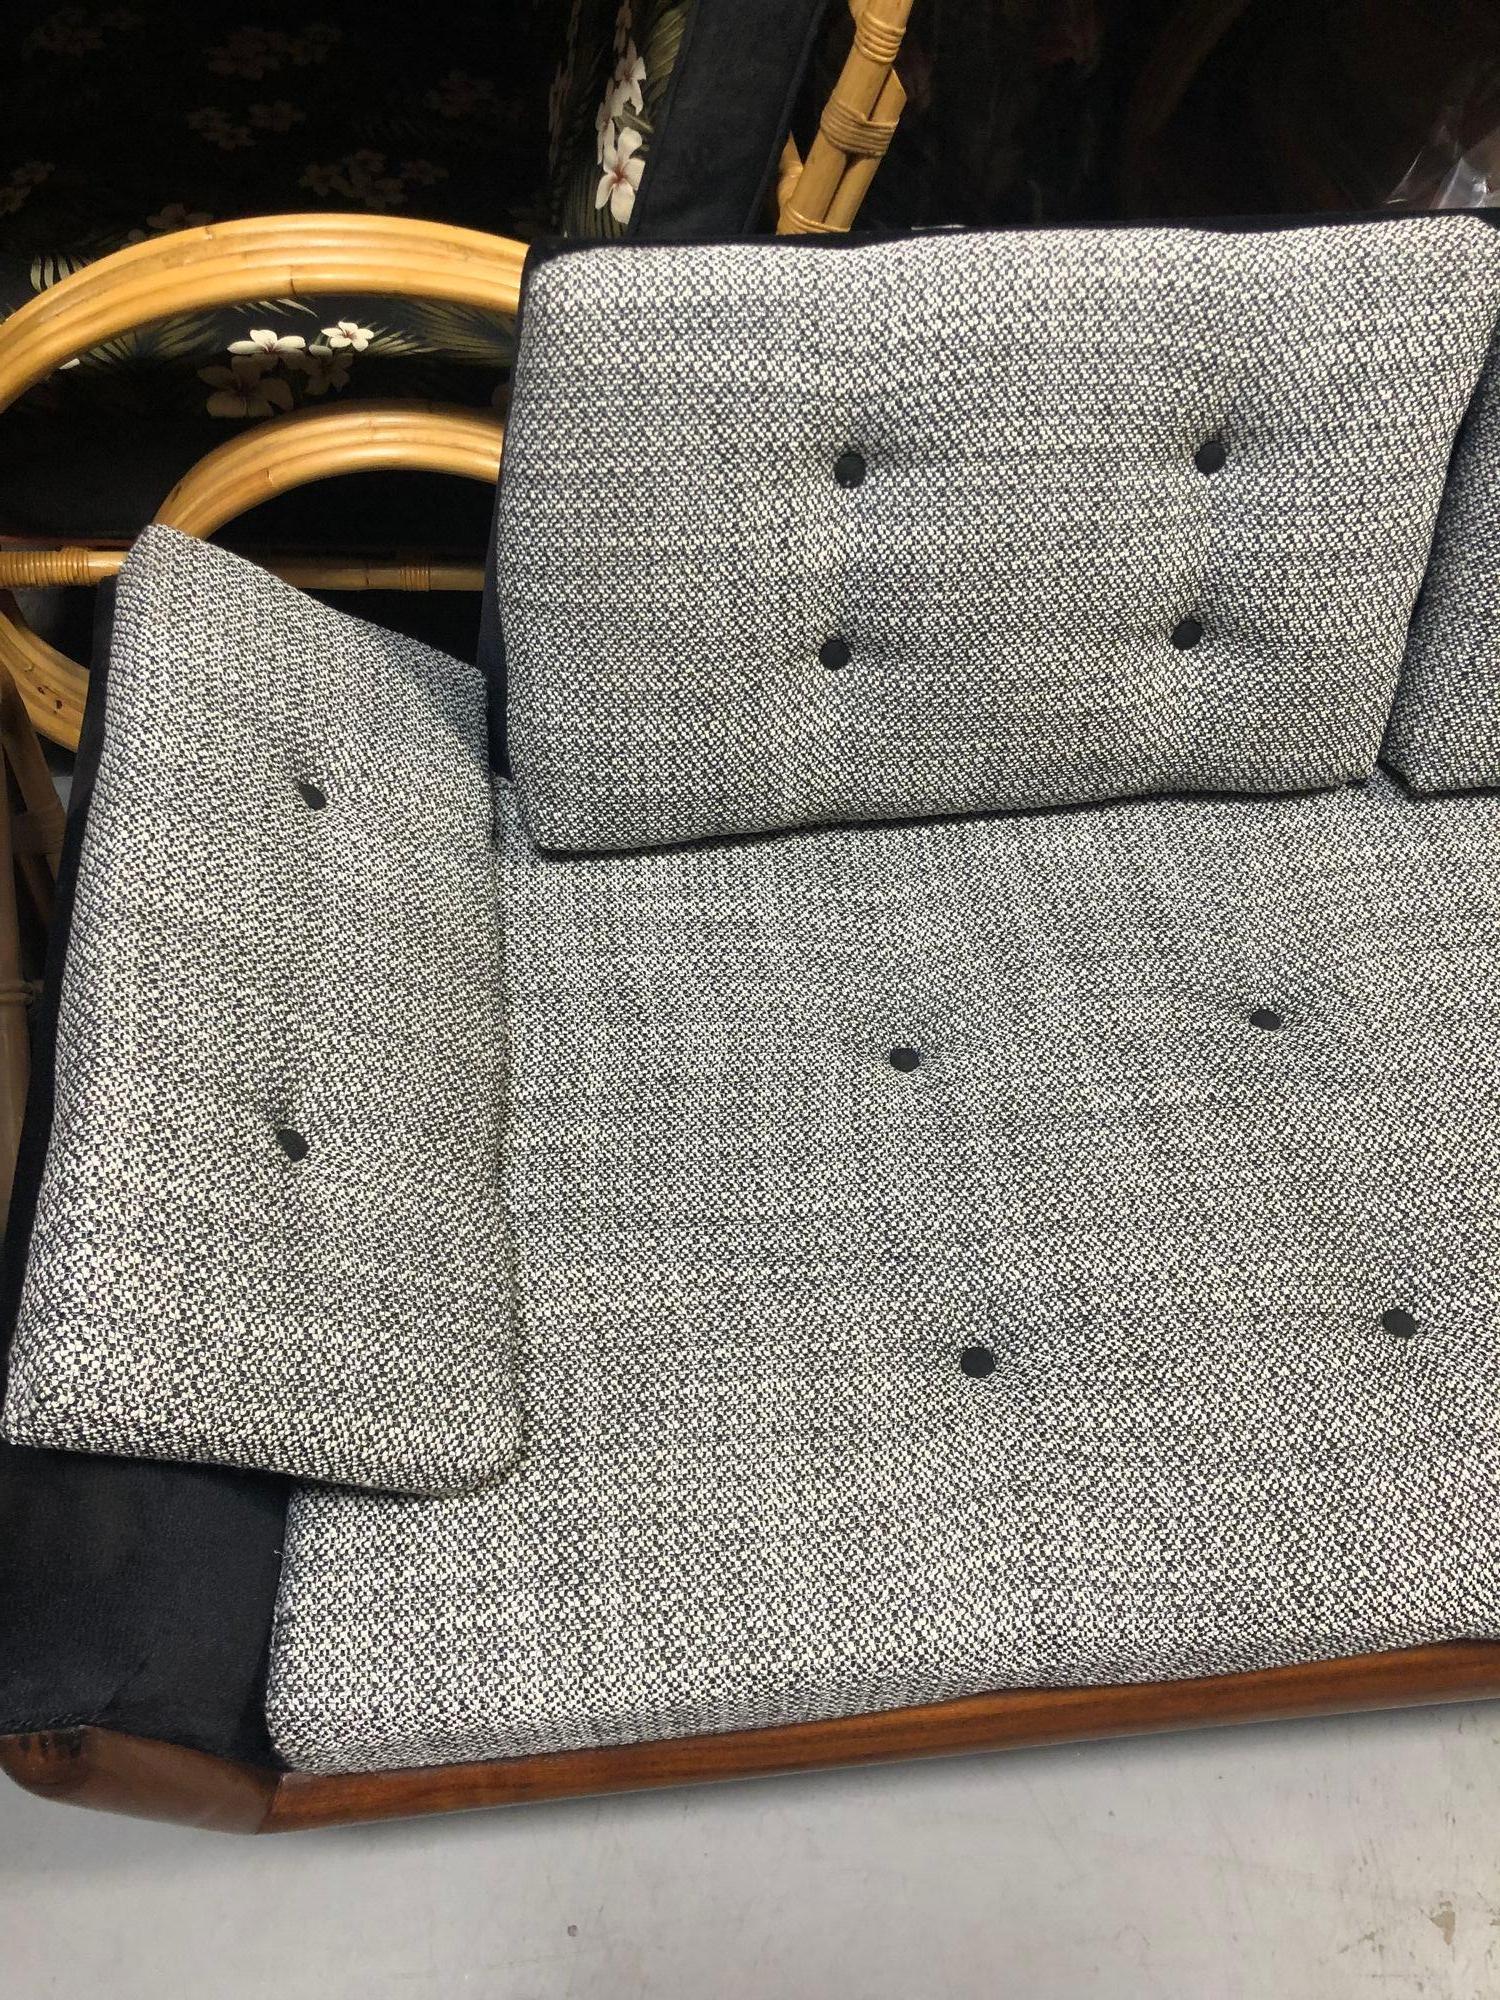 Impeccably refurbished, the Adrian Pearsall mid-century modern sofa exudes charm. Its captivating black and white weave tweed cushions evoke a striking grey texture. Adorned with geometric walnut legs, this sofa offers adjustable comfort with